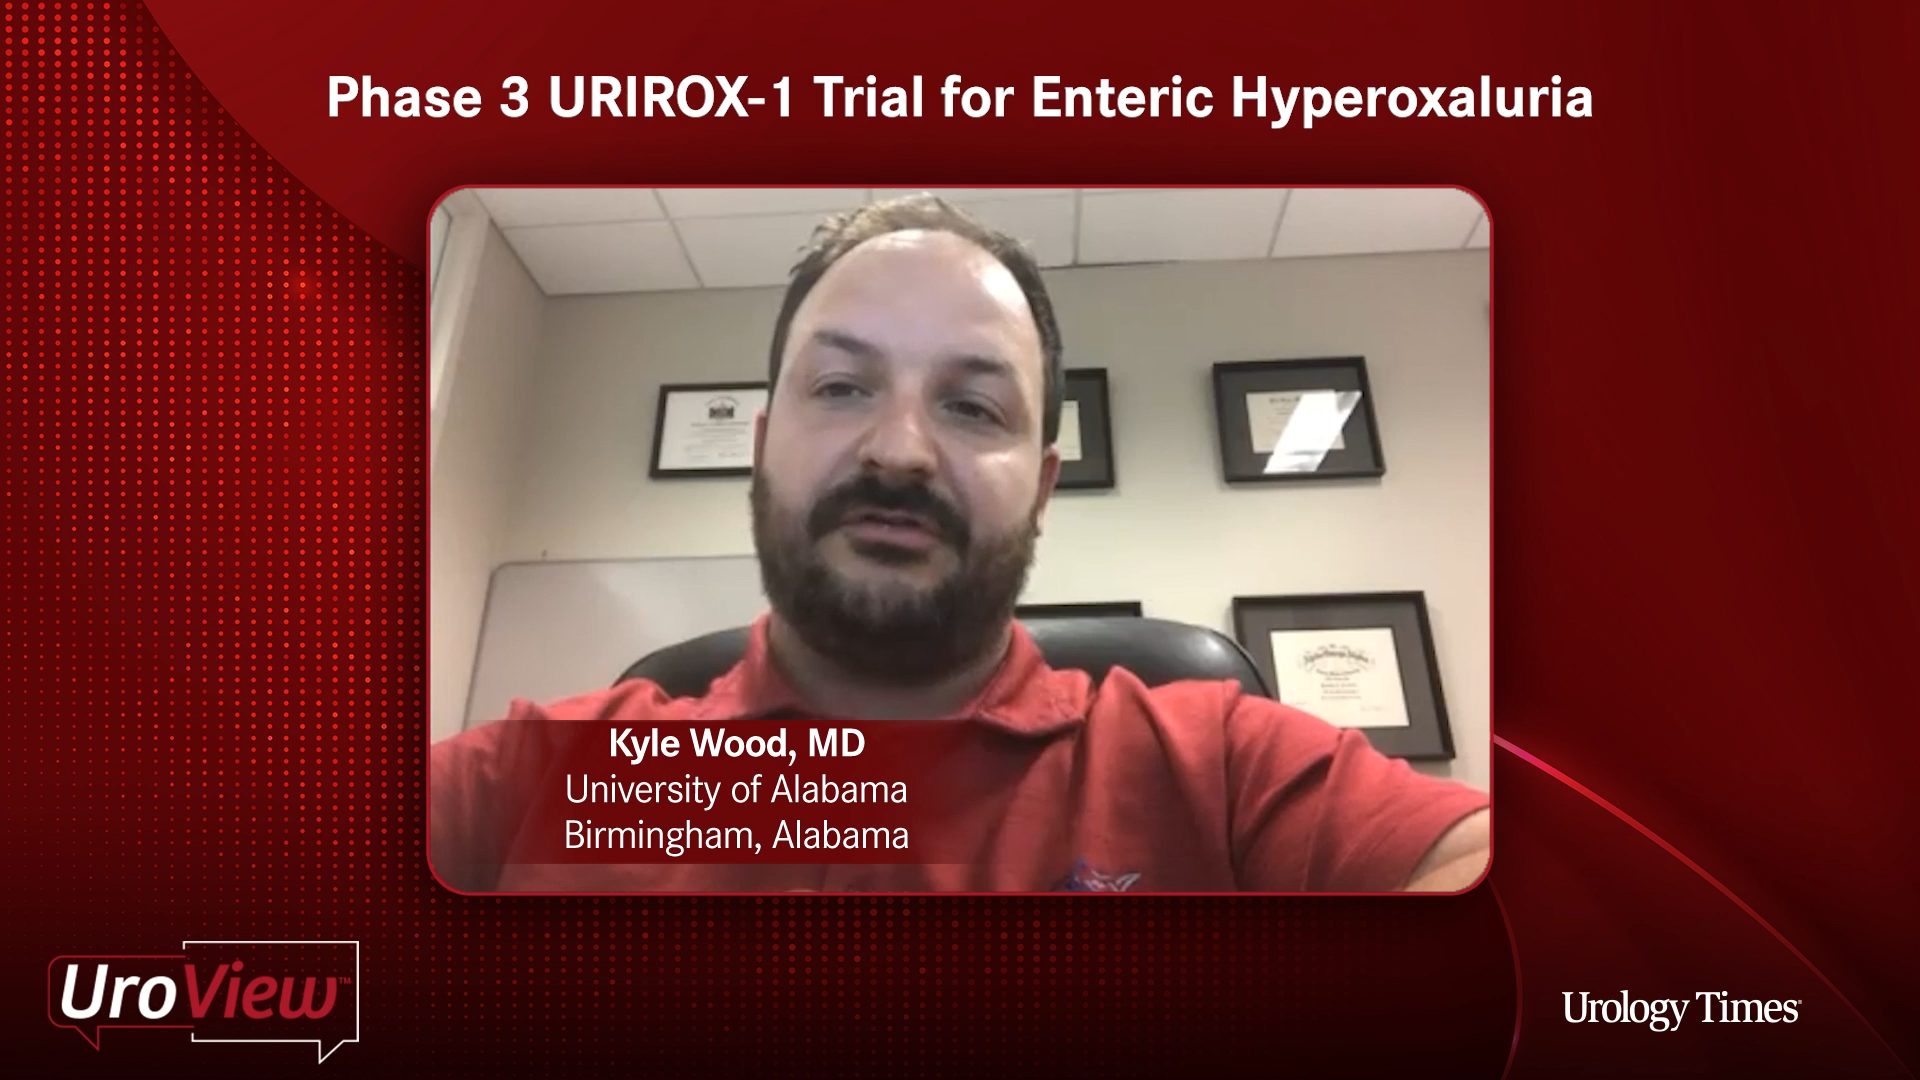 Phase 3 URIROX-1 Trial for Enteric Hyperoxaluria